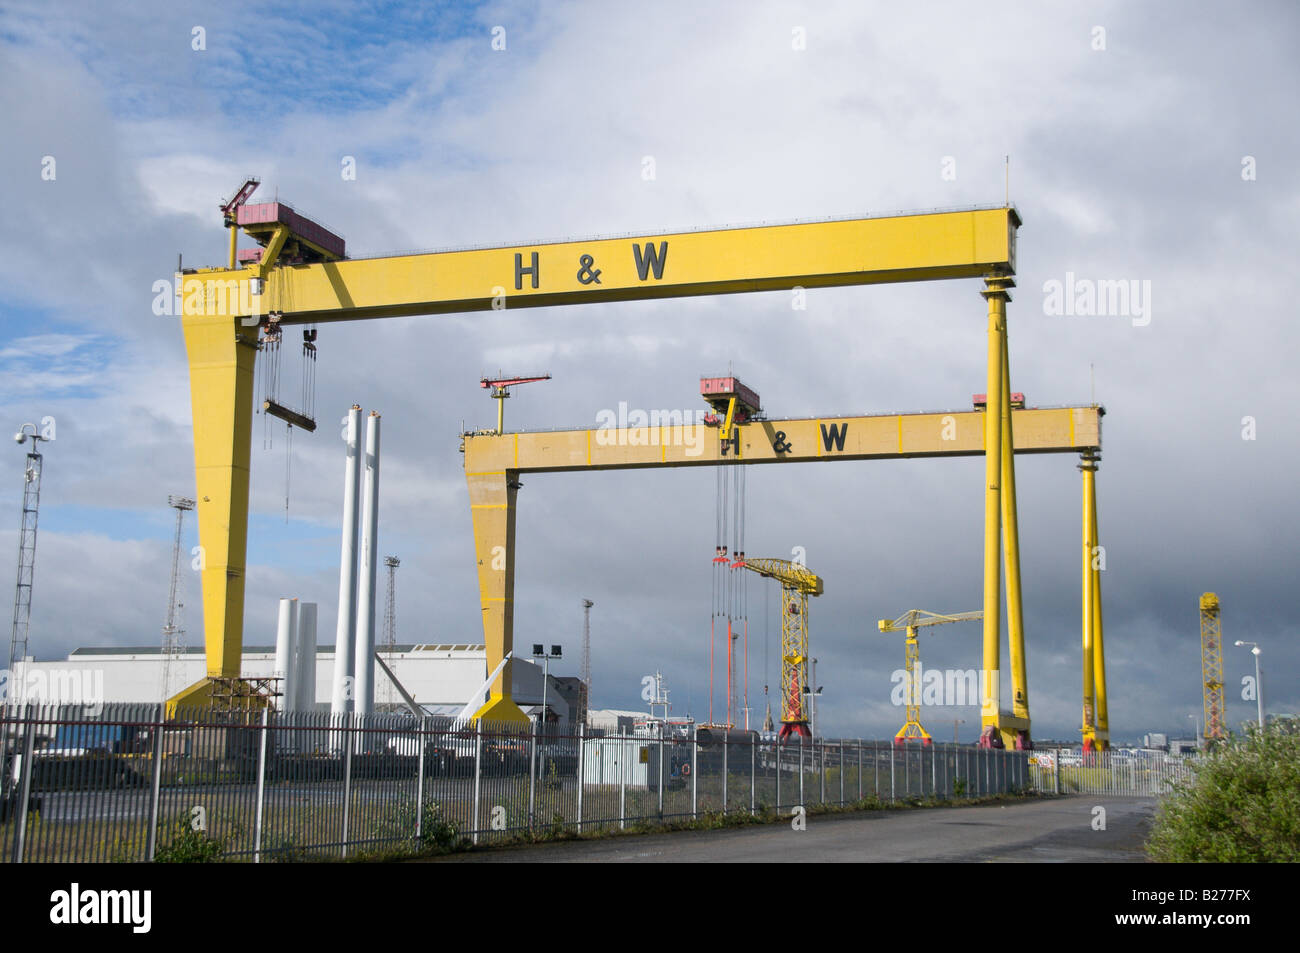 samson-and-goliath-the-famous-yellow-cranes-at-harland-and-wolff-belfast-B277FX.jpg